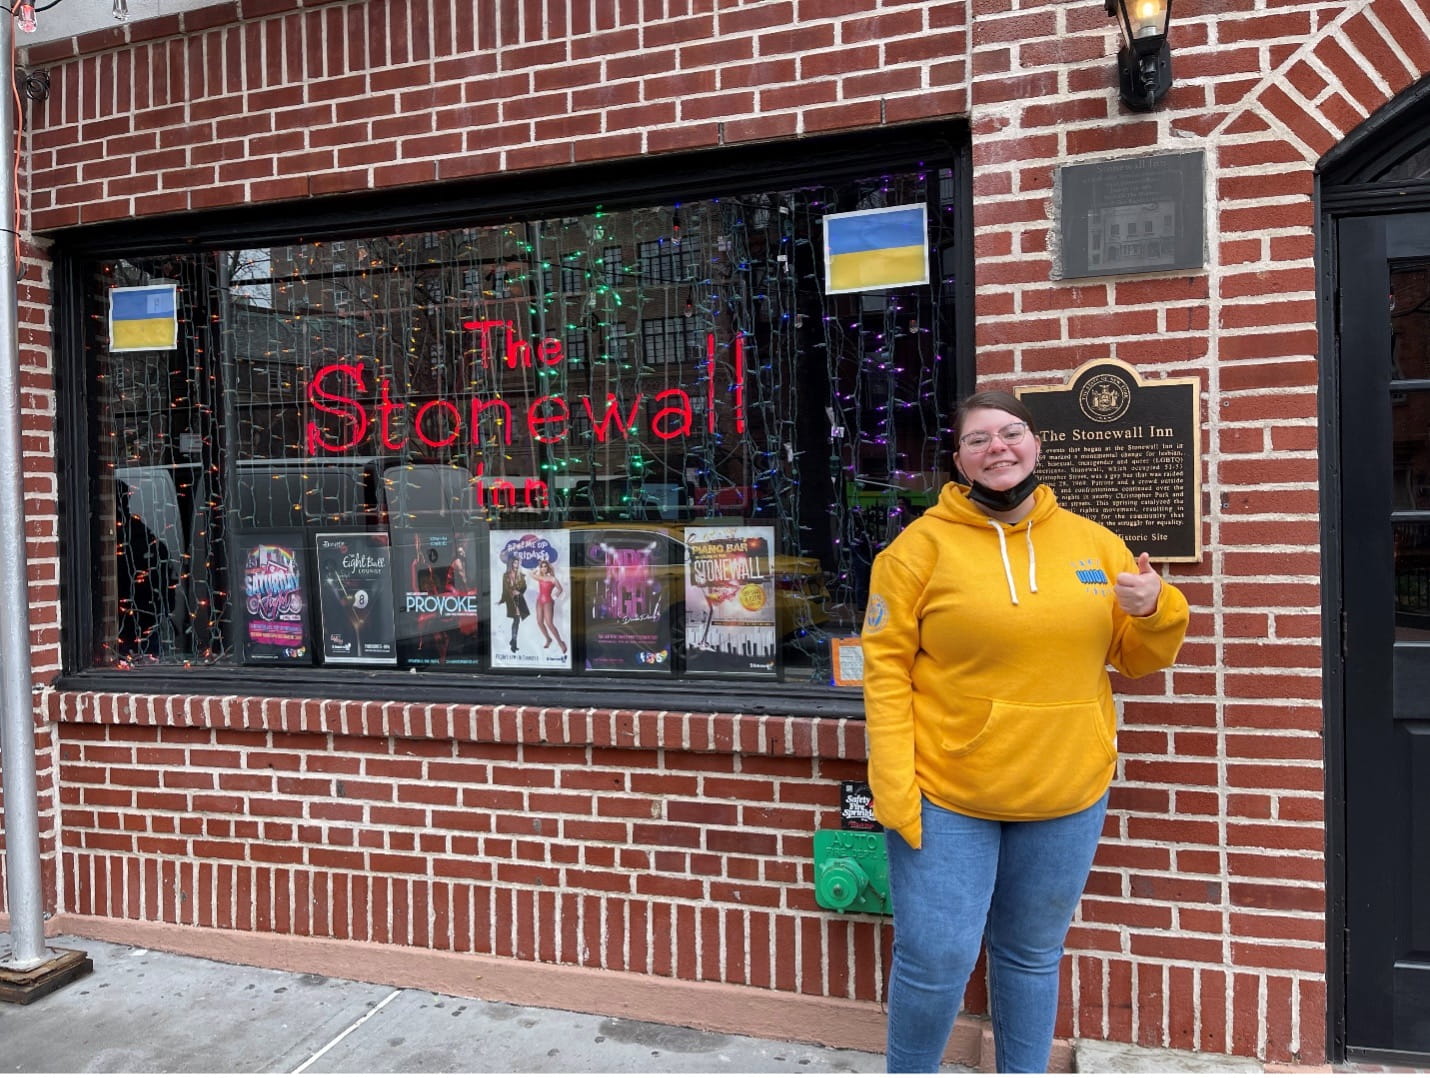 Drexel student stands in front of the Stonewall Inn.